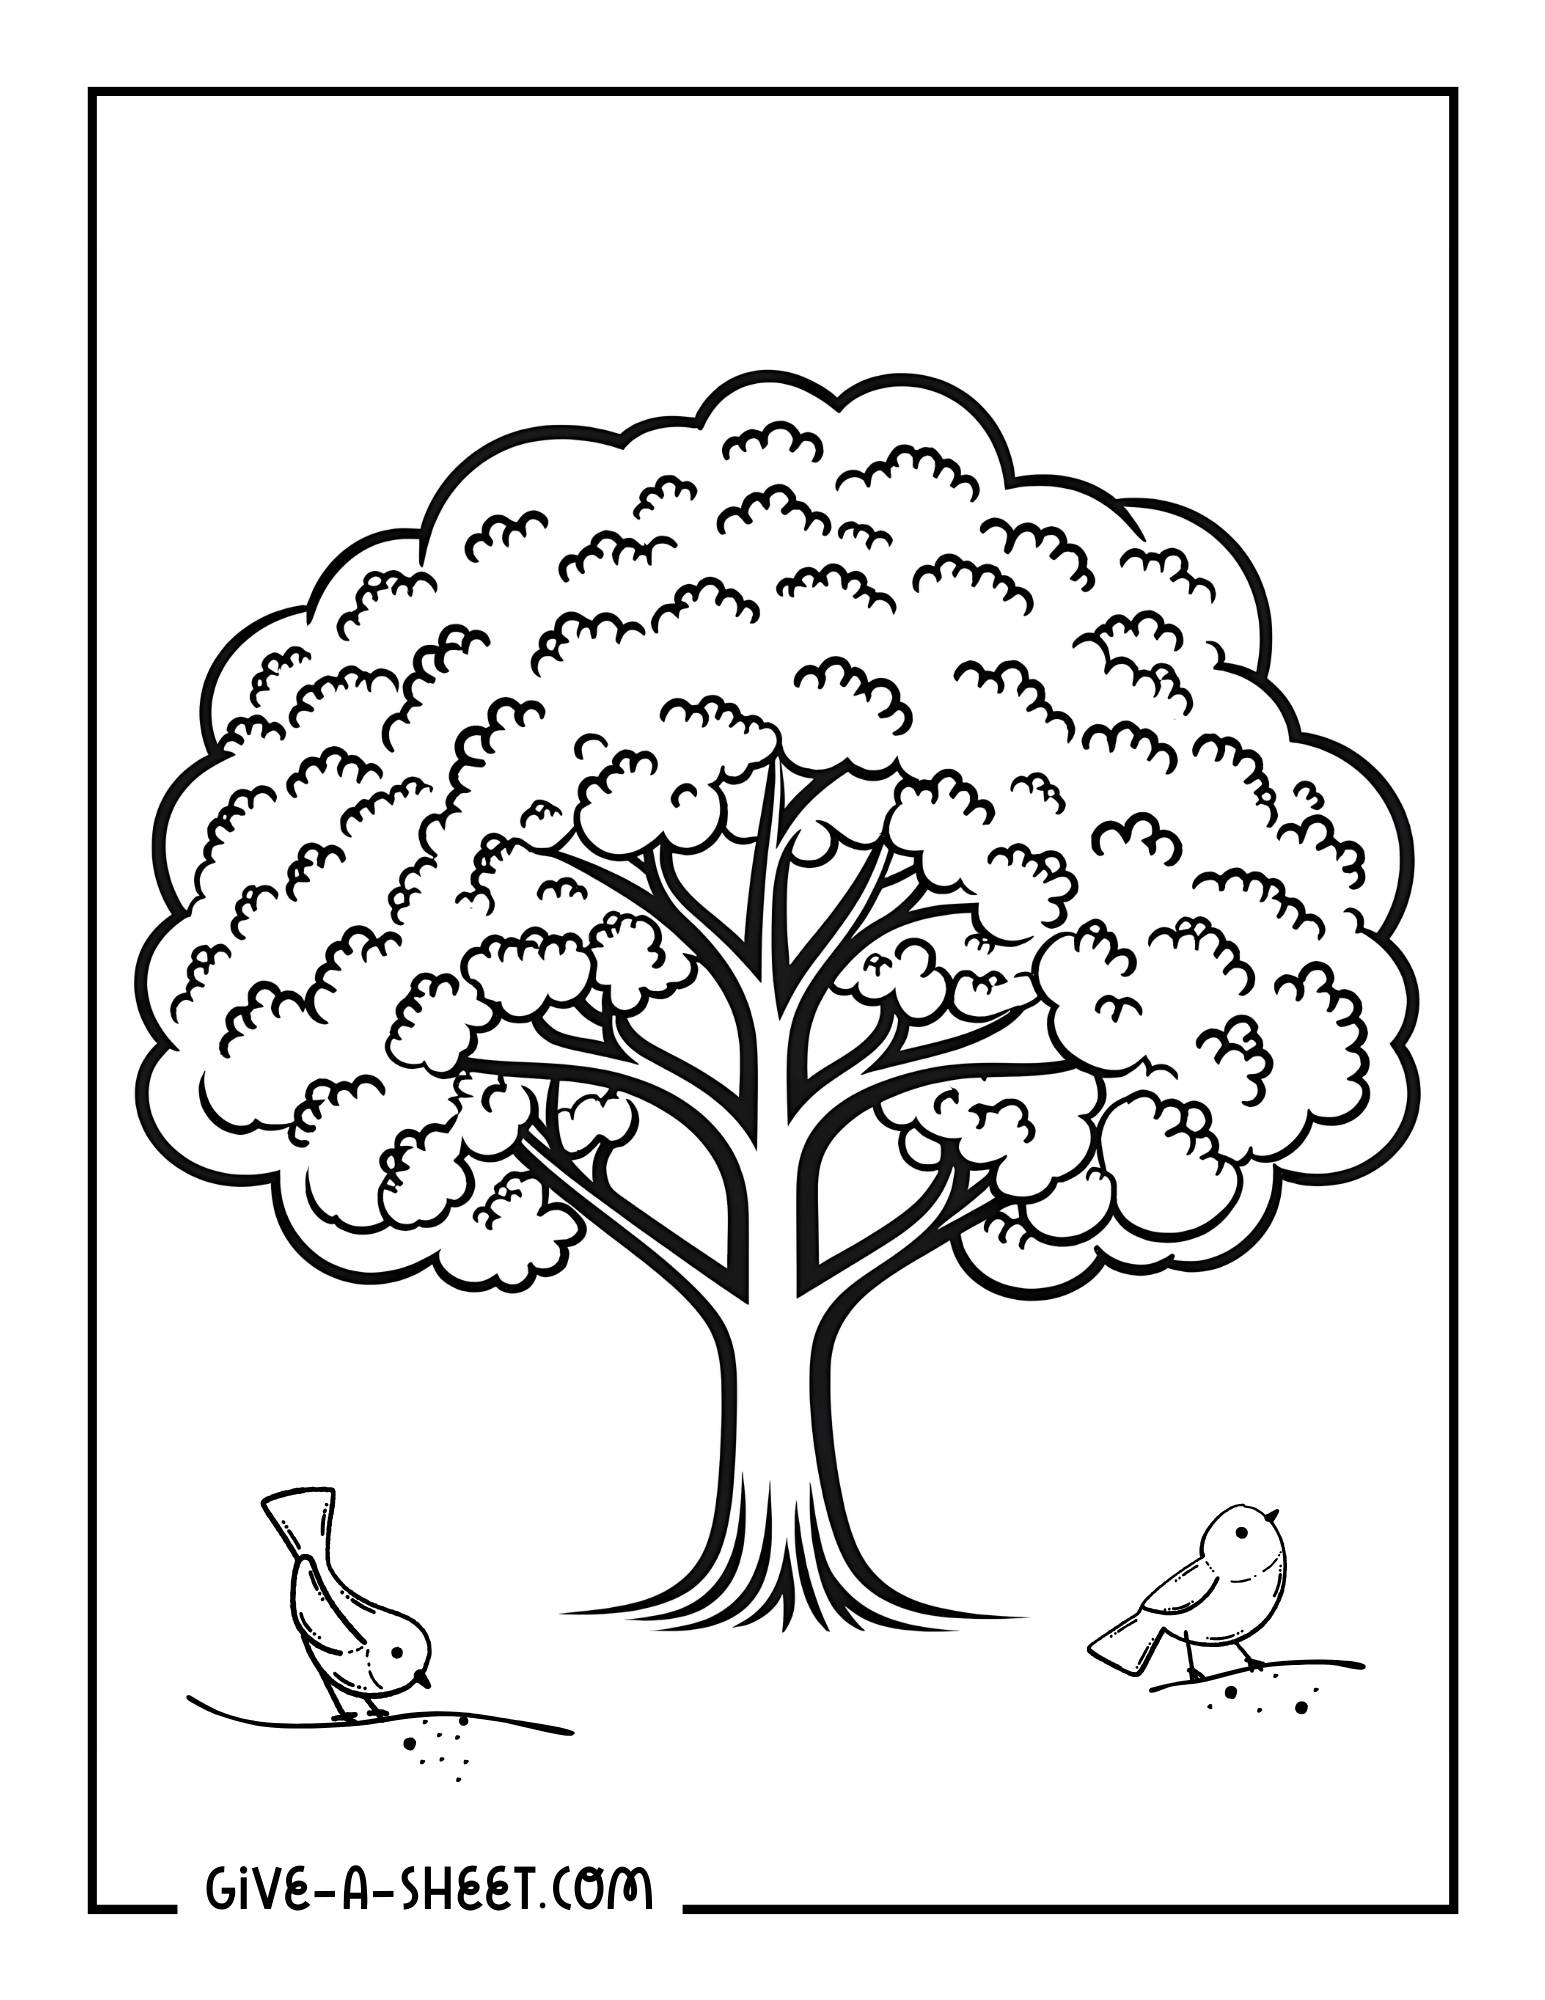 Honey locust tree pictures to color for kids.